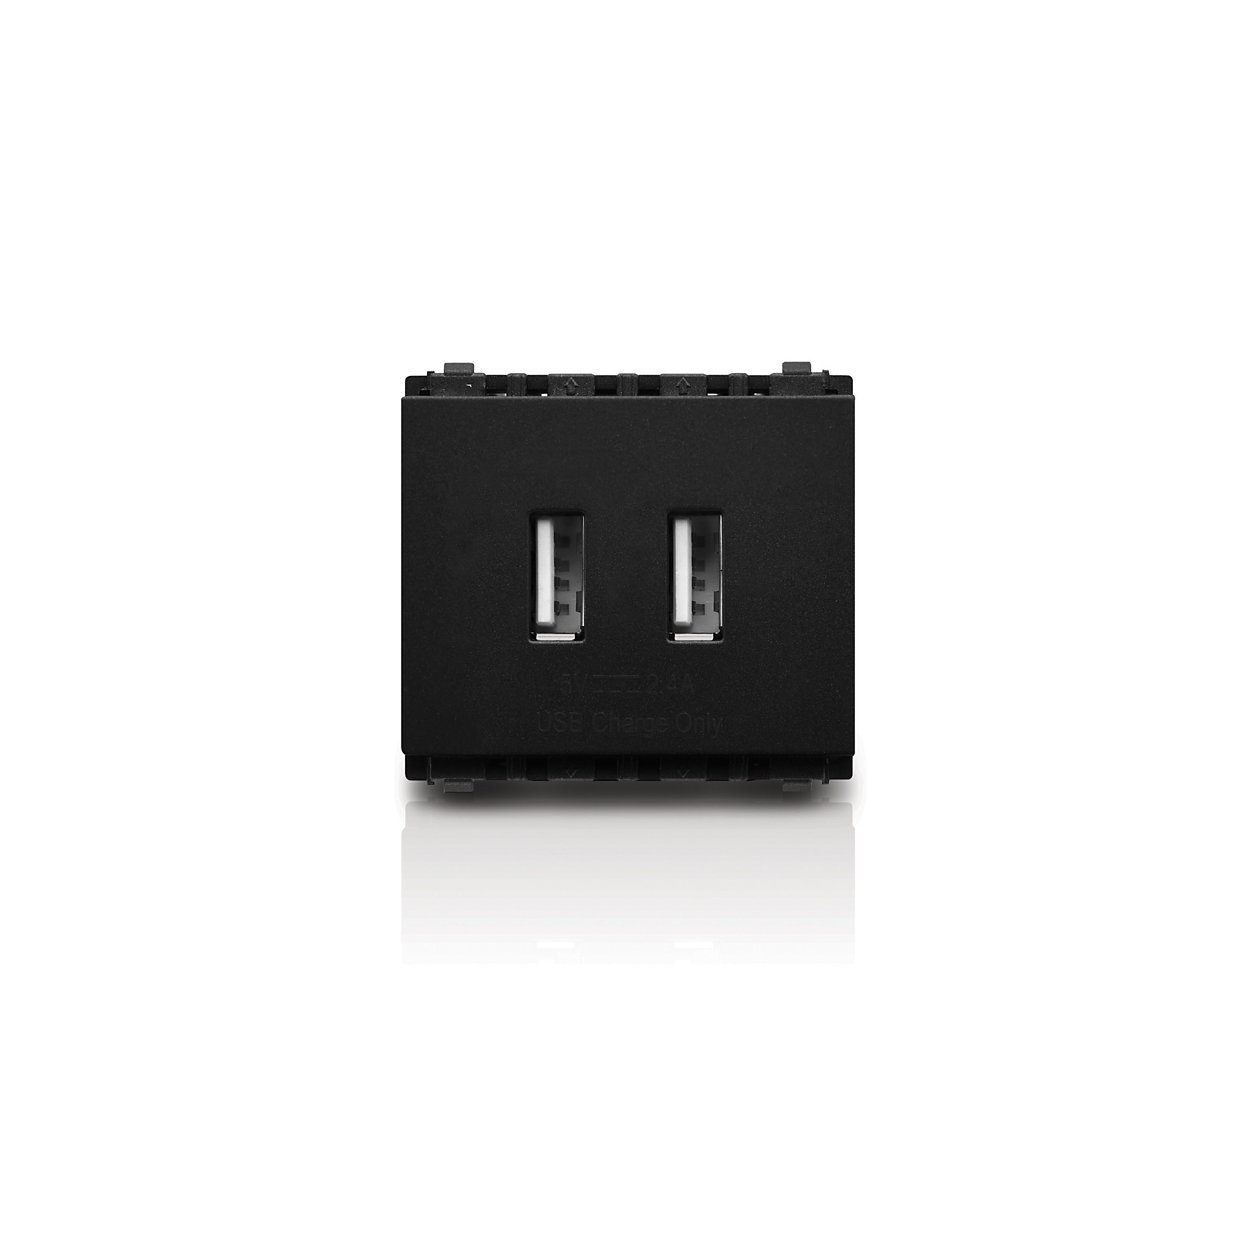 High quality switch and socket designed to safely last for years